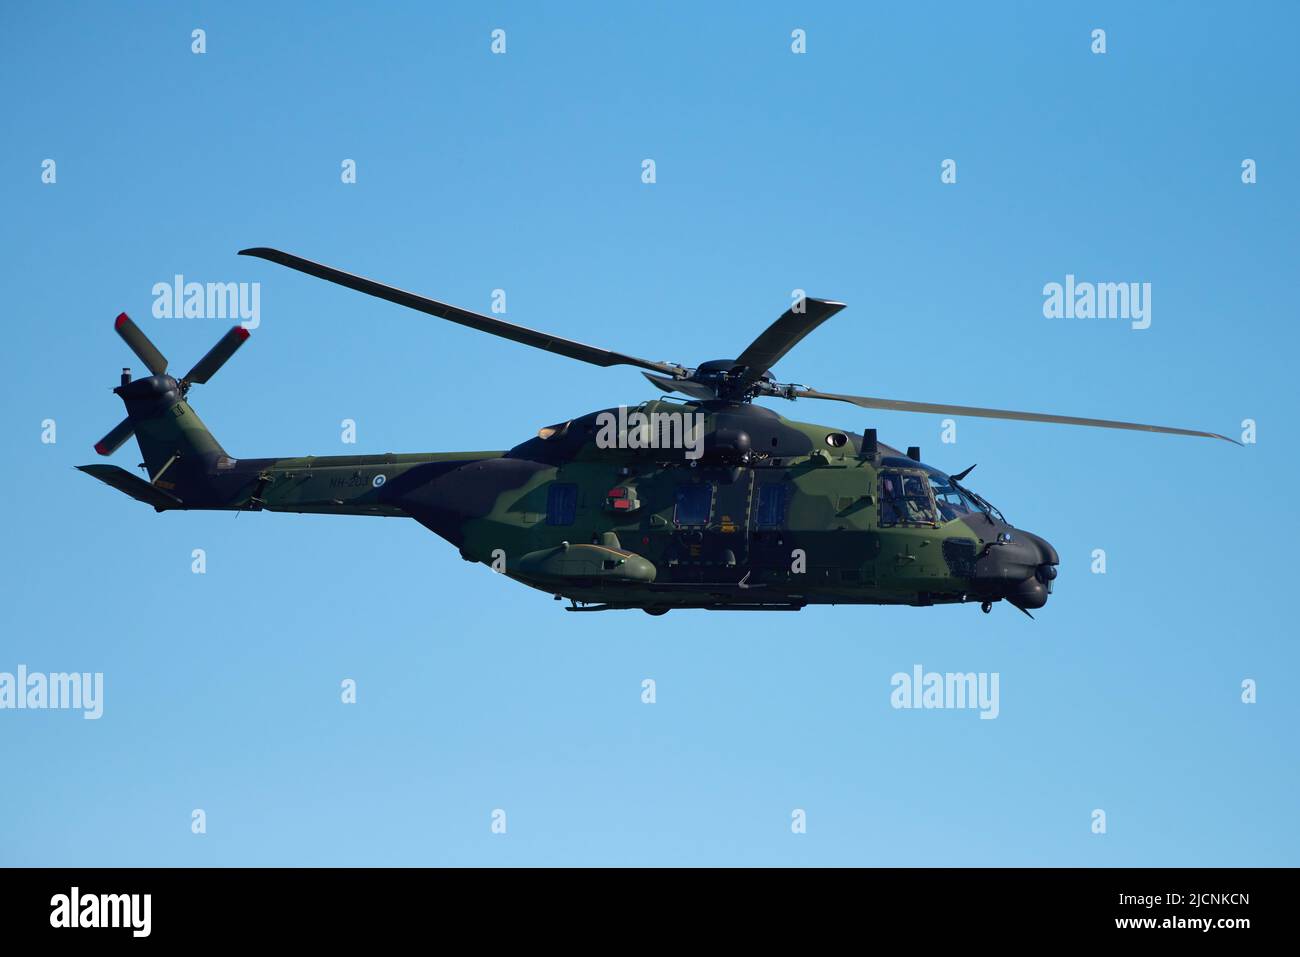 Helsinki, Finland - 9 June 2017: Finnish Army NH90 helicopter at the Kaivopuisto Air Show in Helsinki, Finland on 9 June 2017. Stock Photo